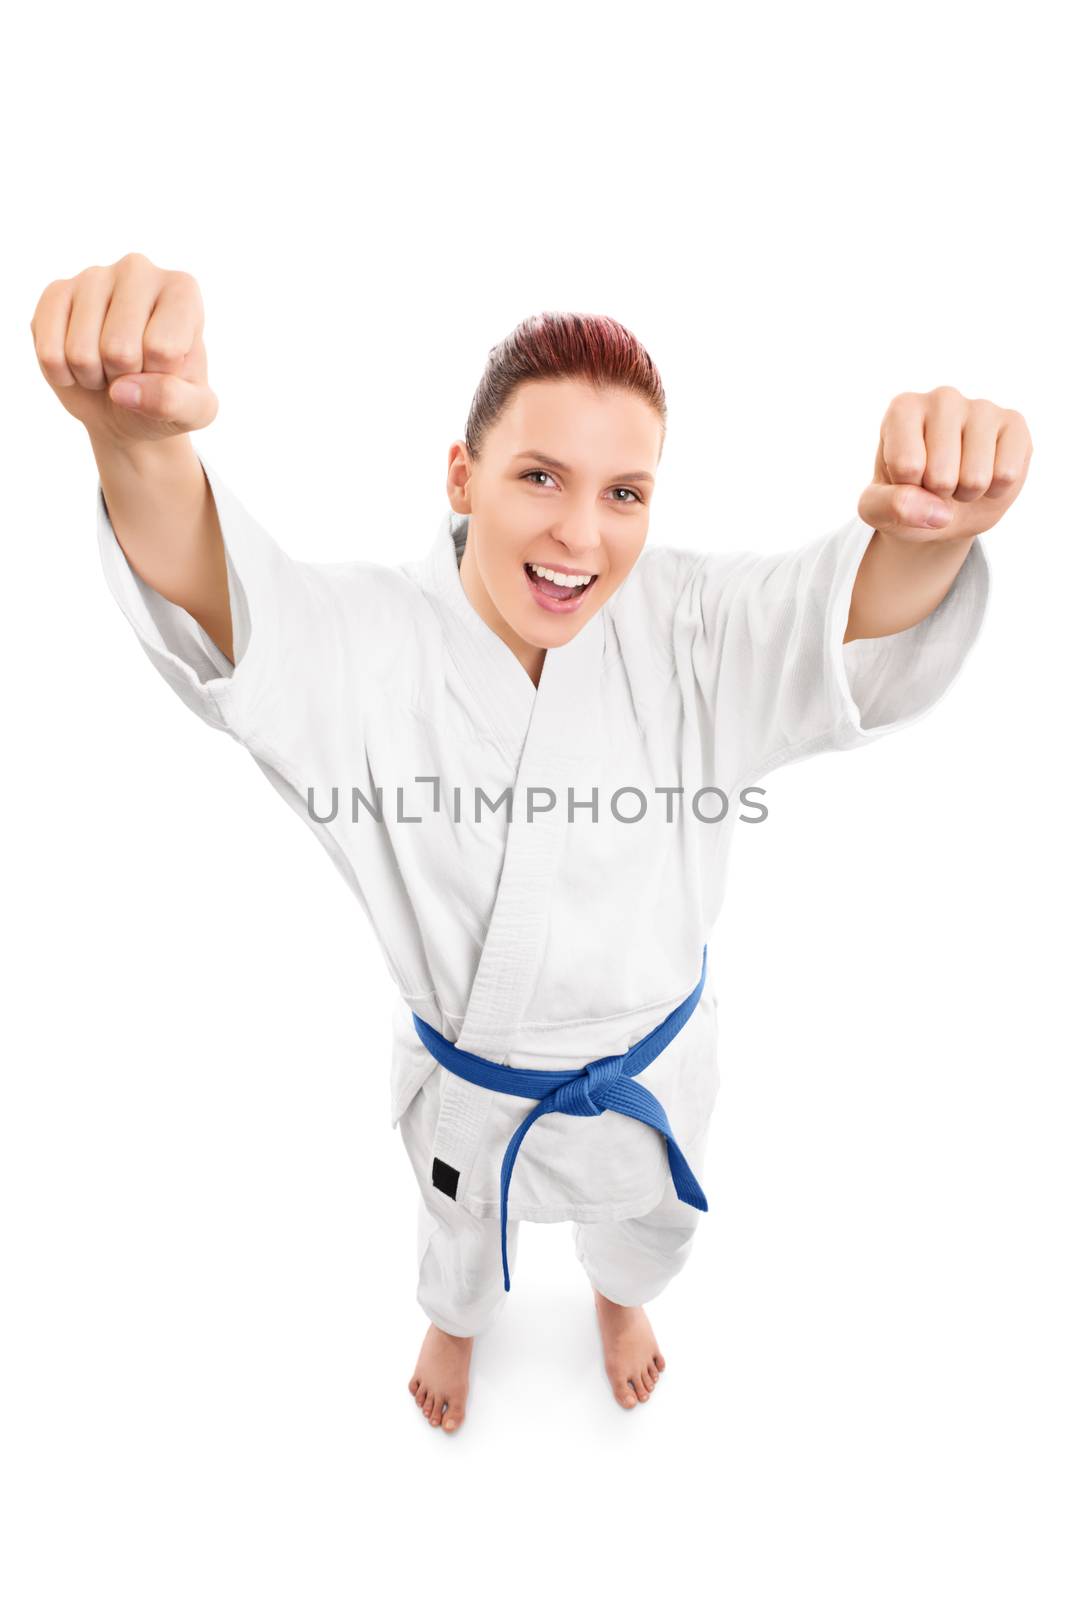 A portrait of a beautiful young girl in a kimono with blue belt cheering, from top perspective, isolated on white background.